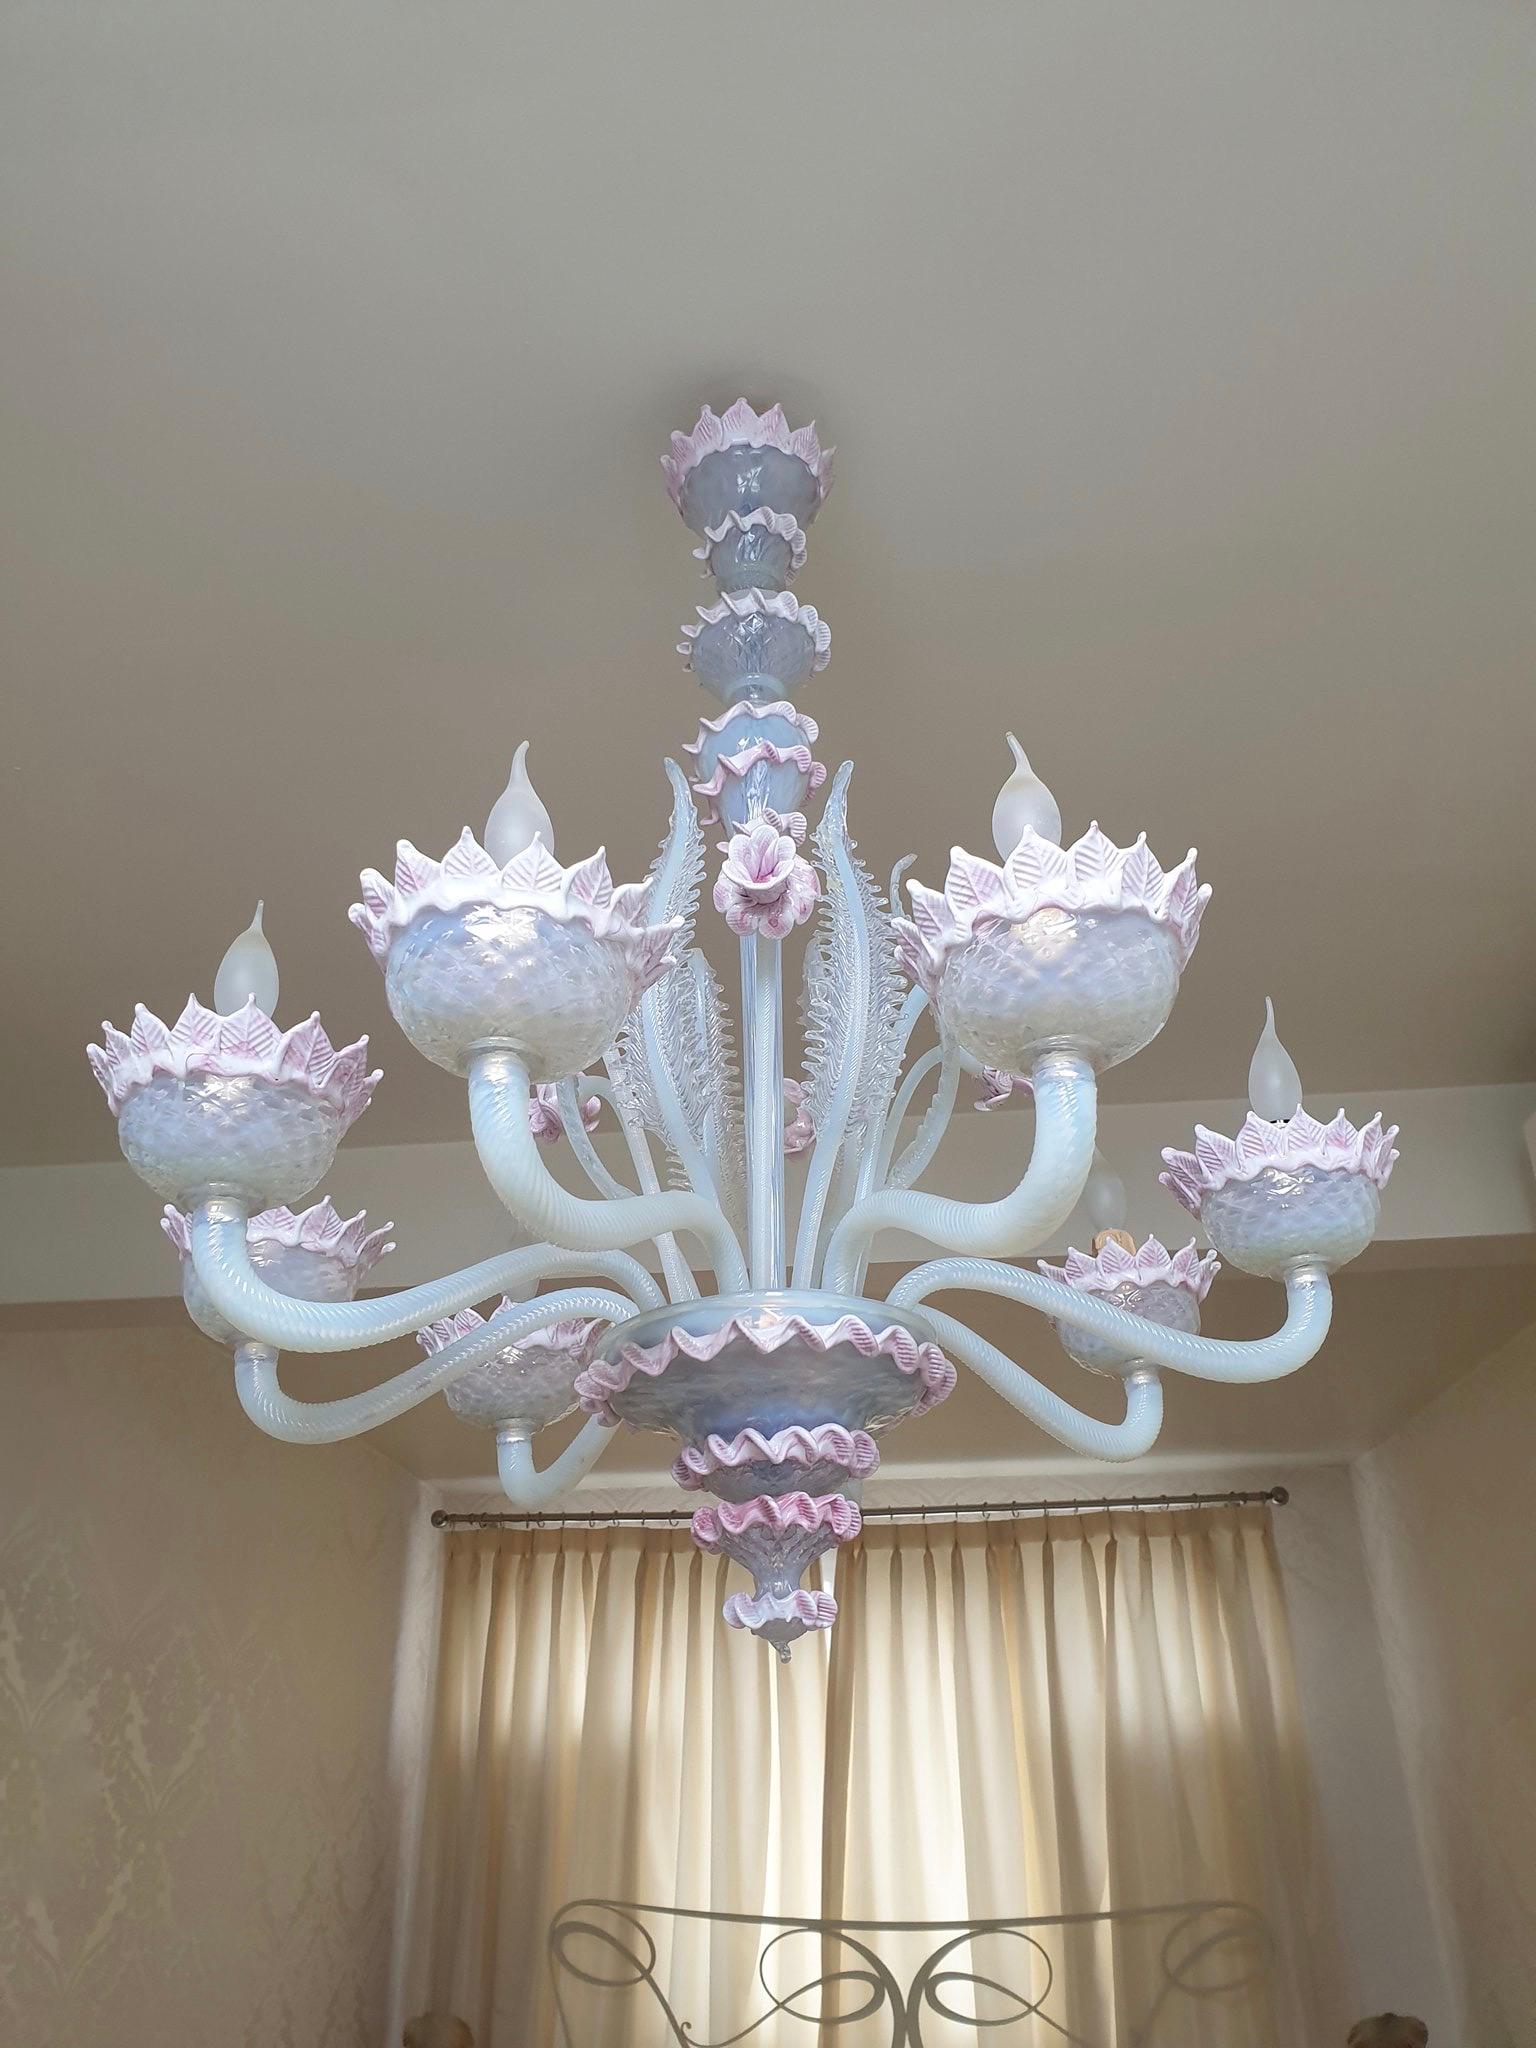 Venetian blown glass chandelier, crafted in Murano Italy, in the mid-20th century. A timeless Murano circular chandelier with an elegant structure finely decorated with eight curved arms ending with upwards corolla shaped bobeiges.
A central pillar